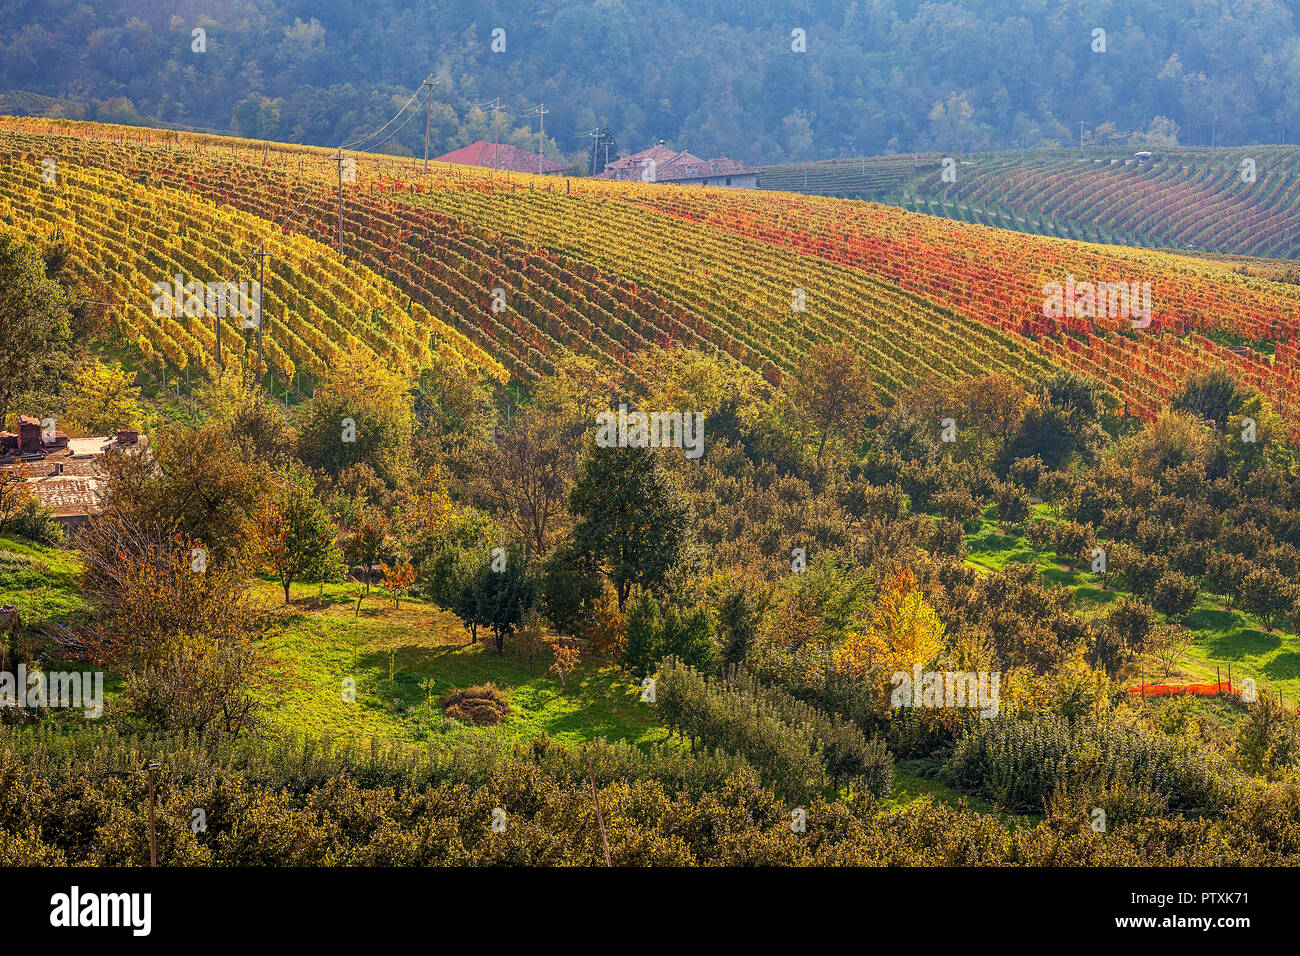 Multicolored vineyards on the hills in autumn in Piedmont, Northern Italy. Stock Photo